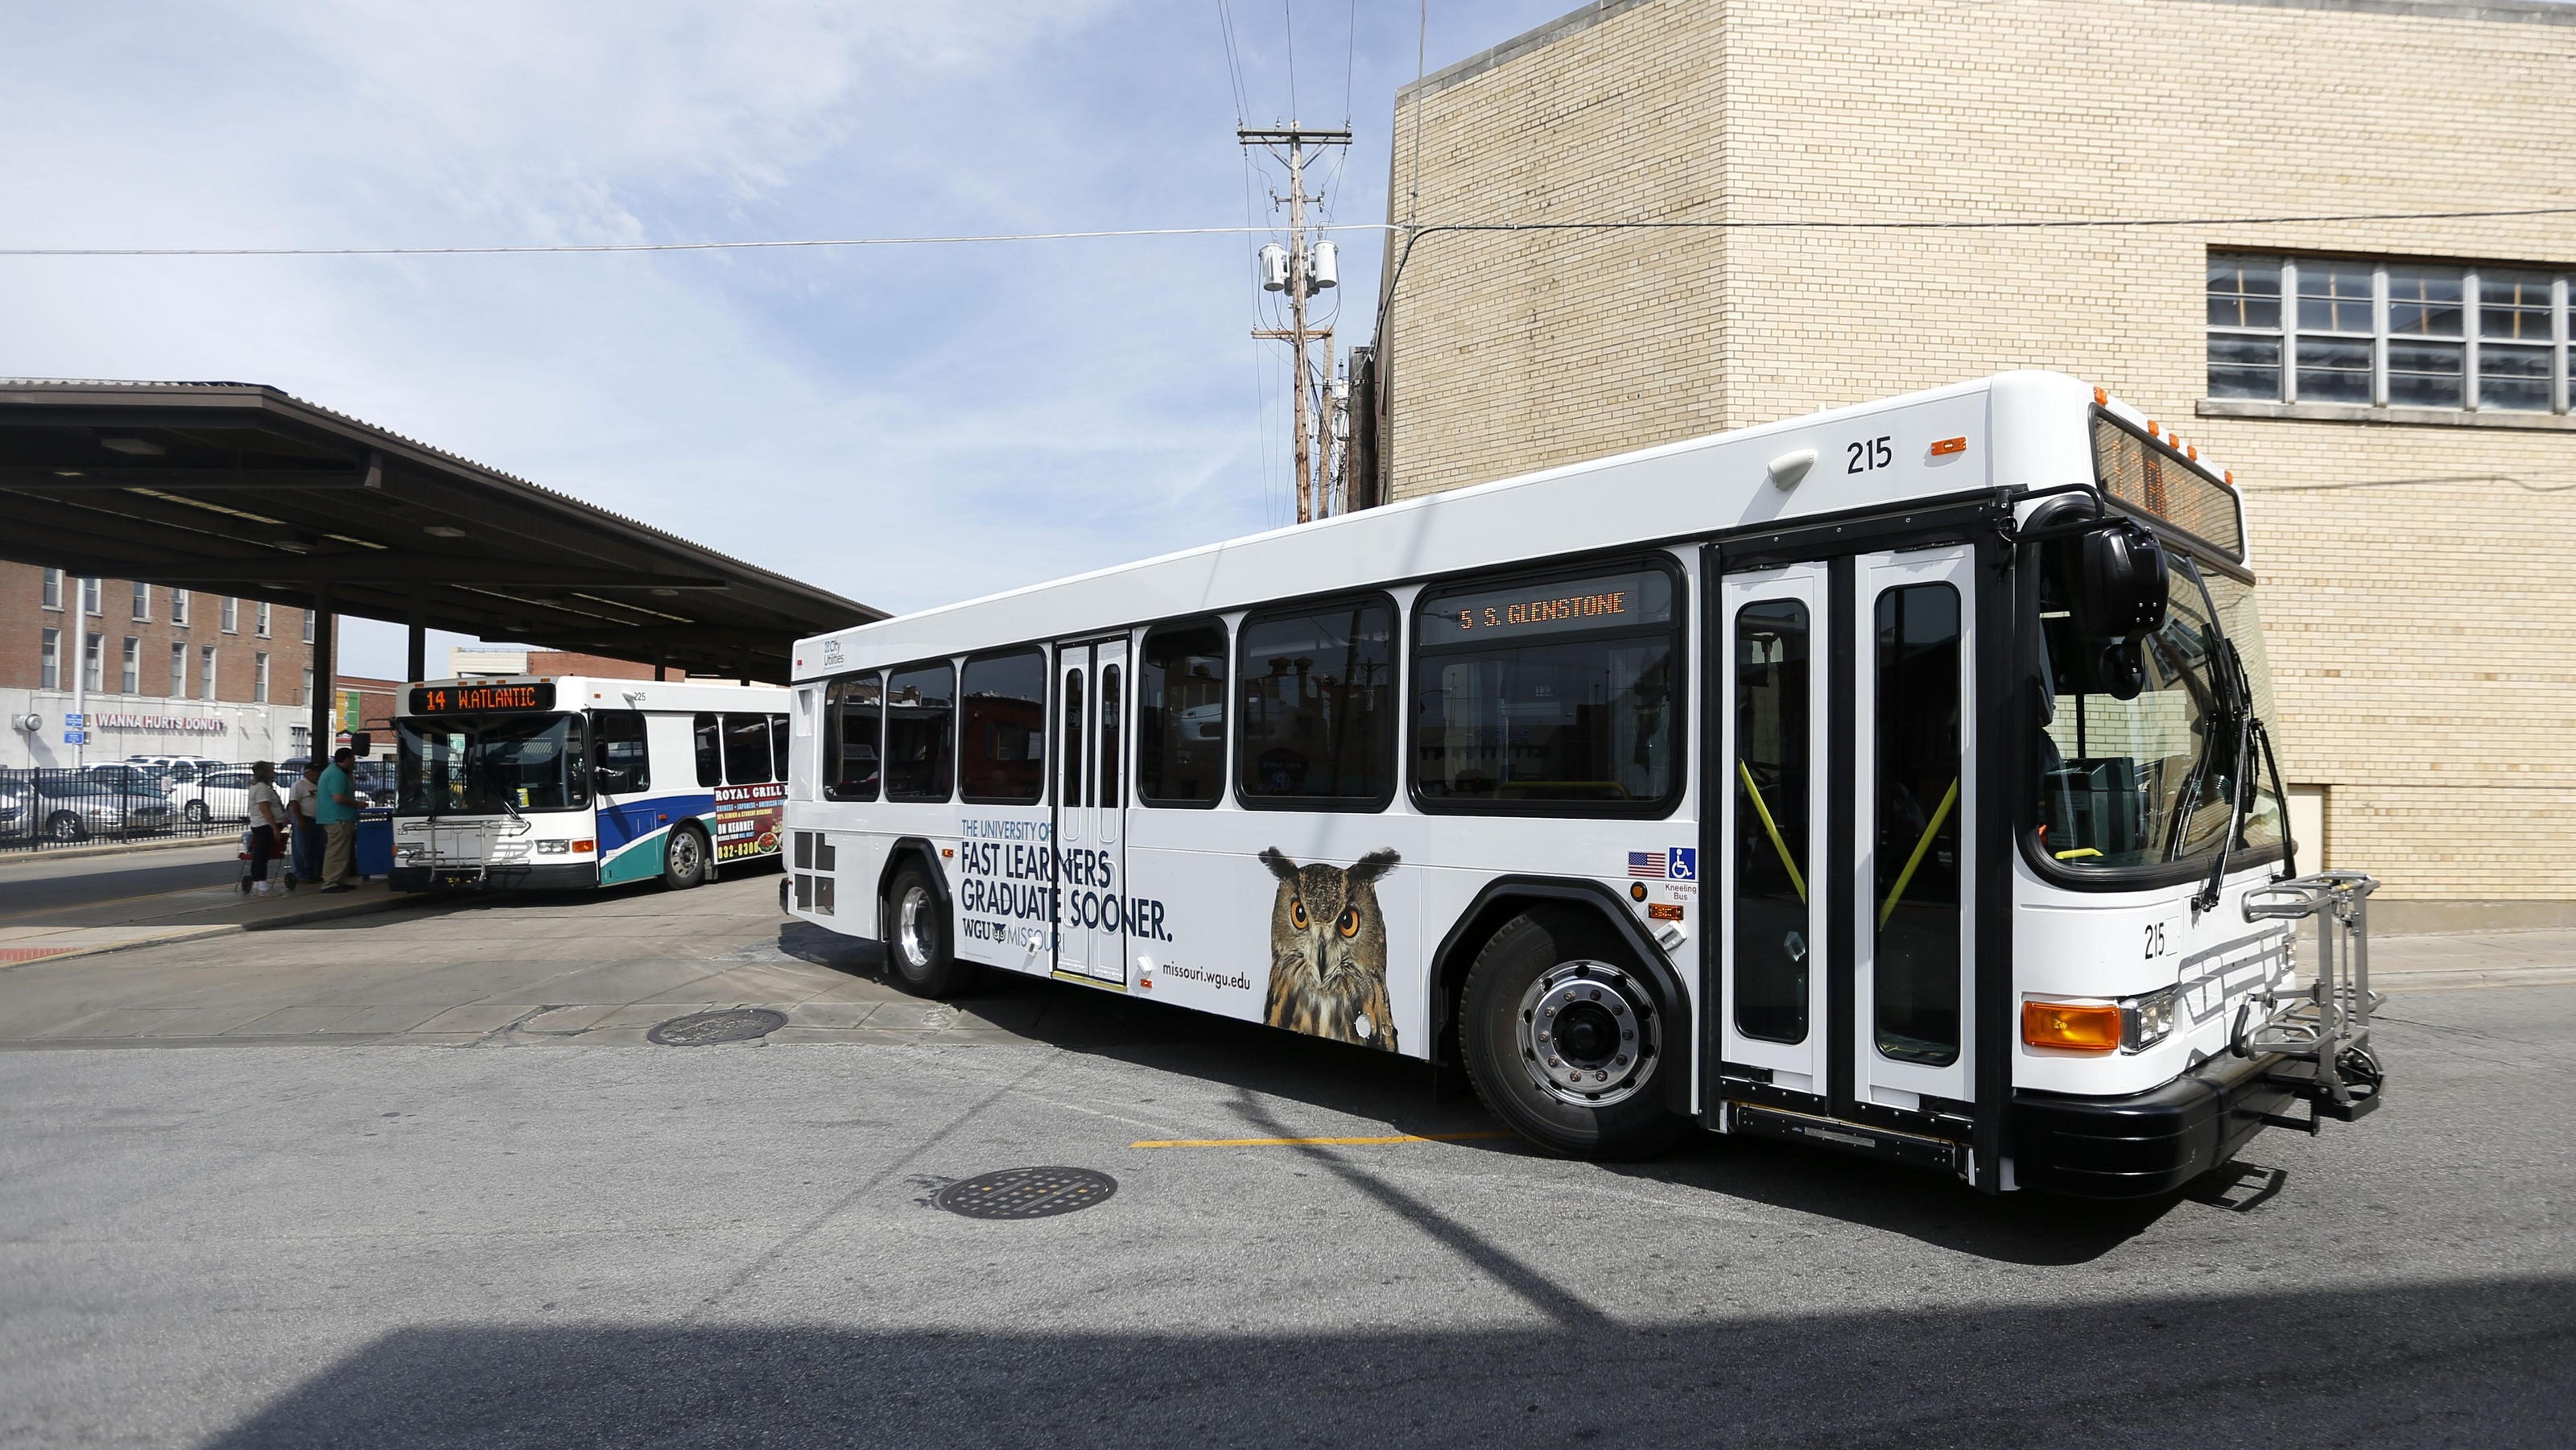 With changes coming to city bus routes, now’s the time to speak up